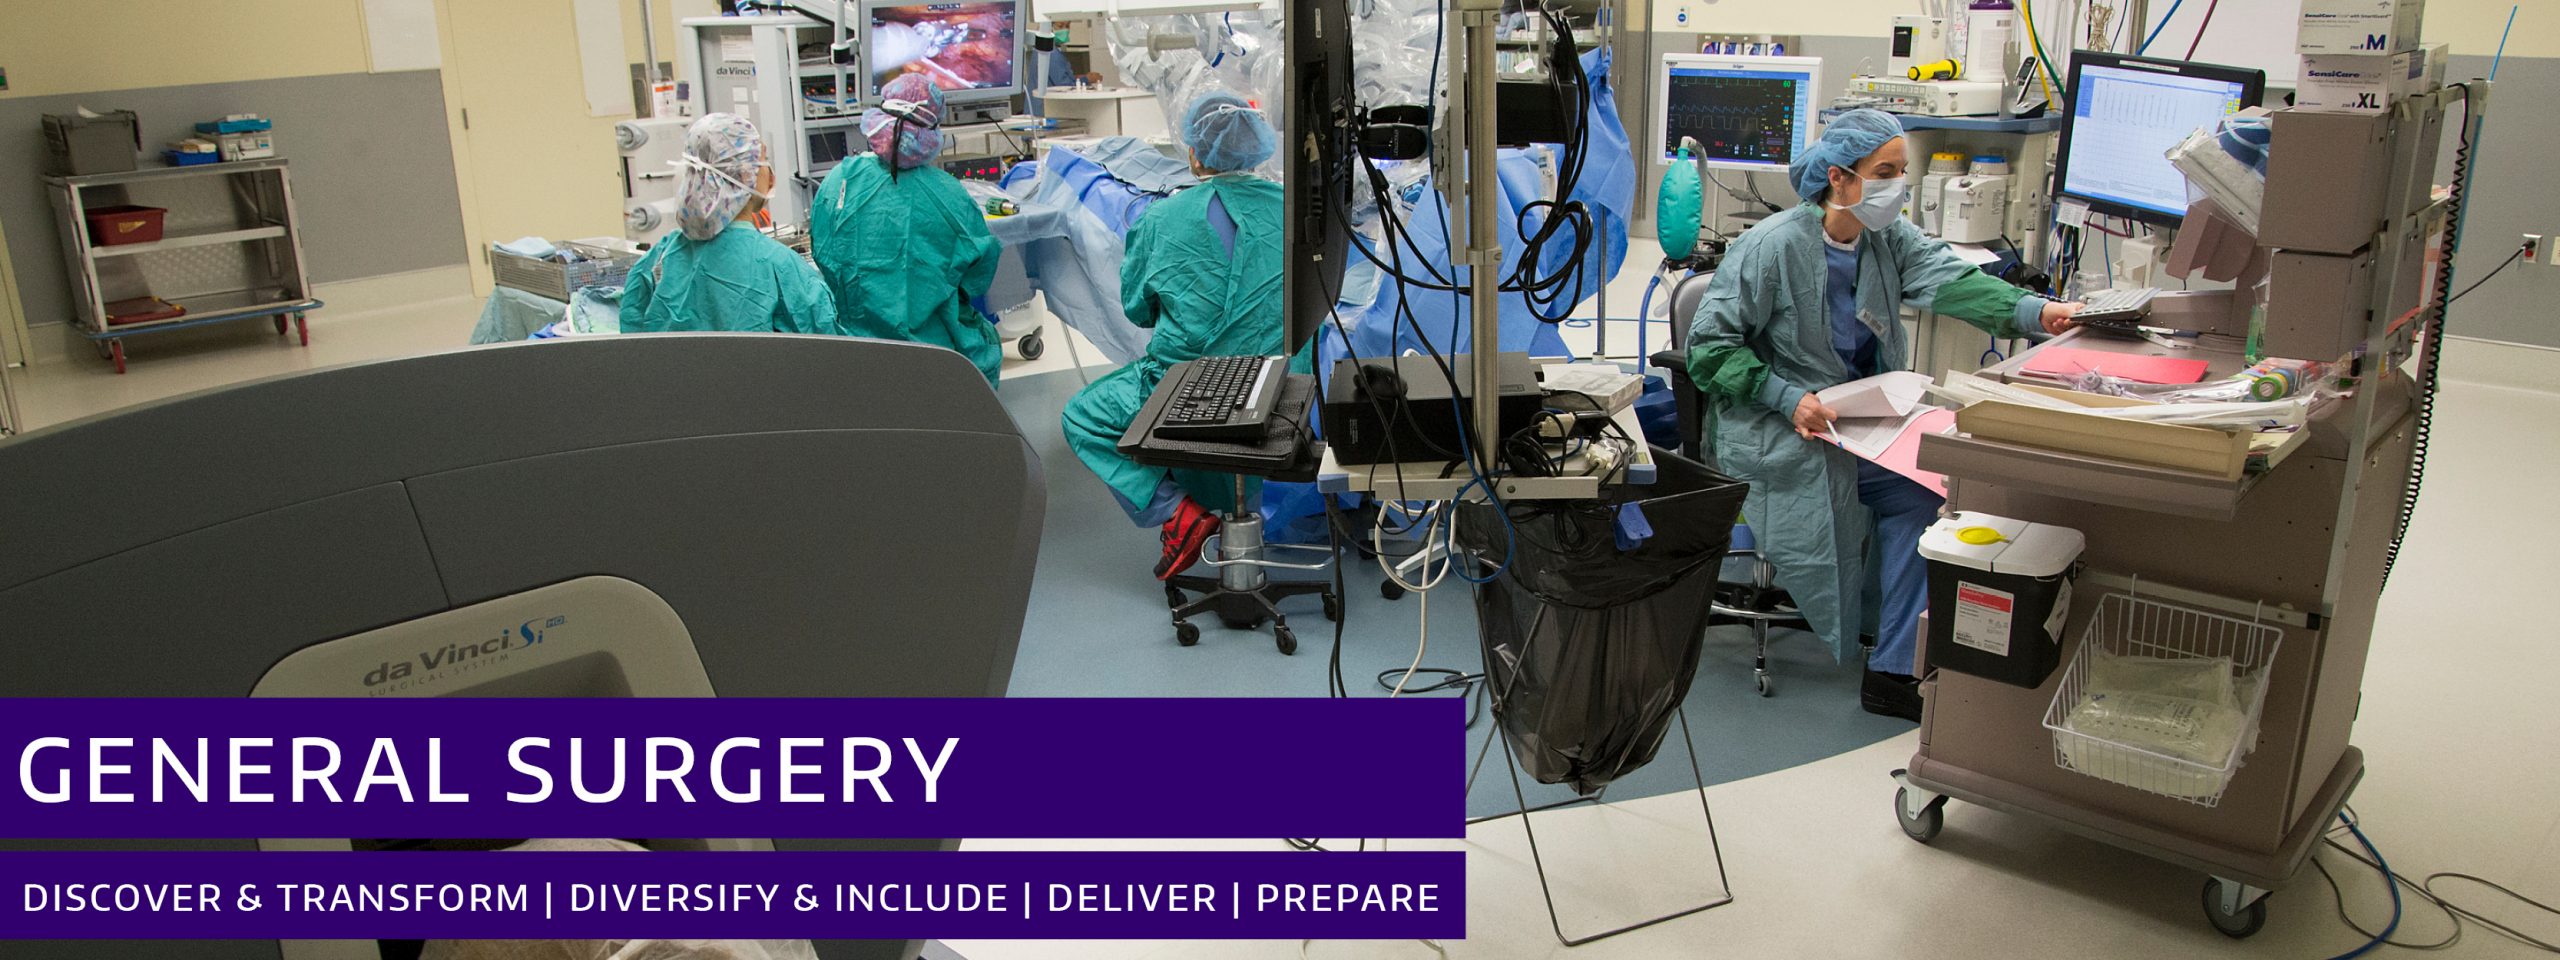 Department of Surgery Division of General Surgery Header Image